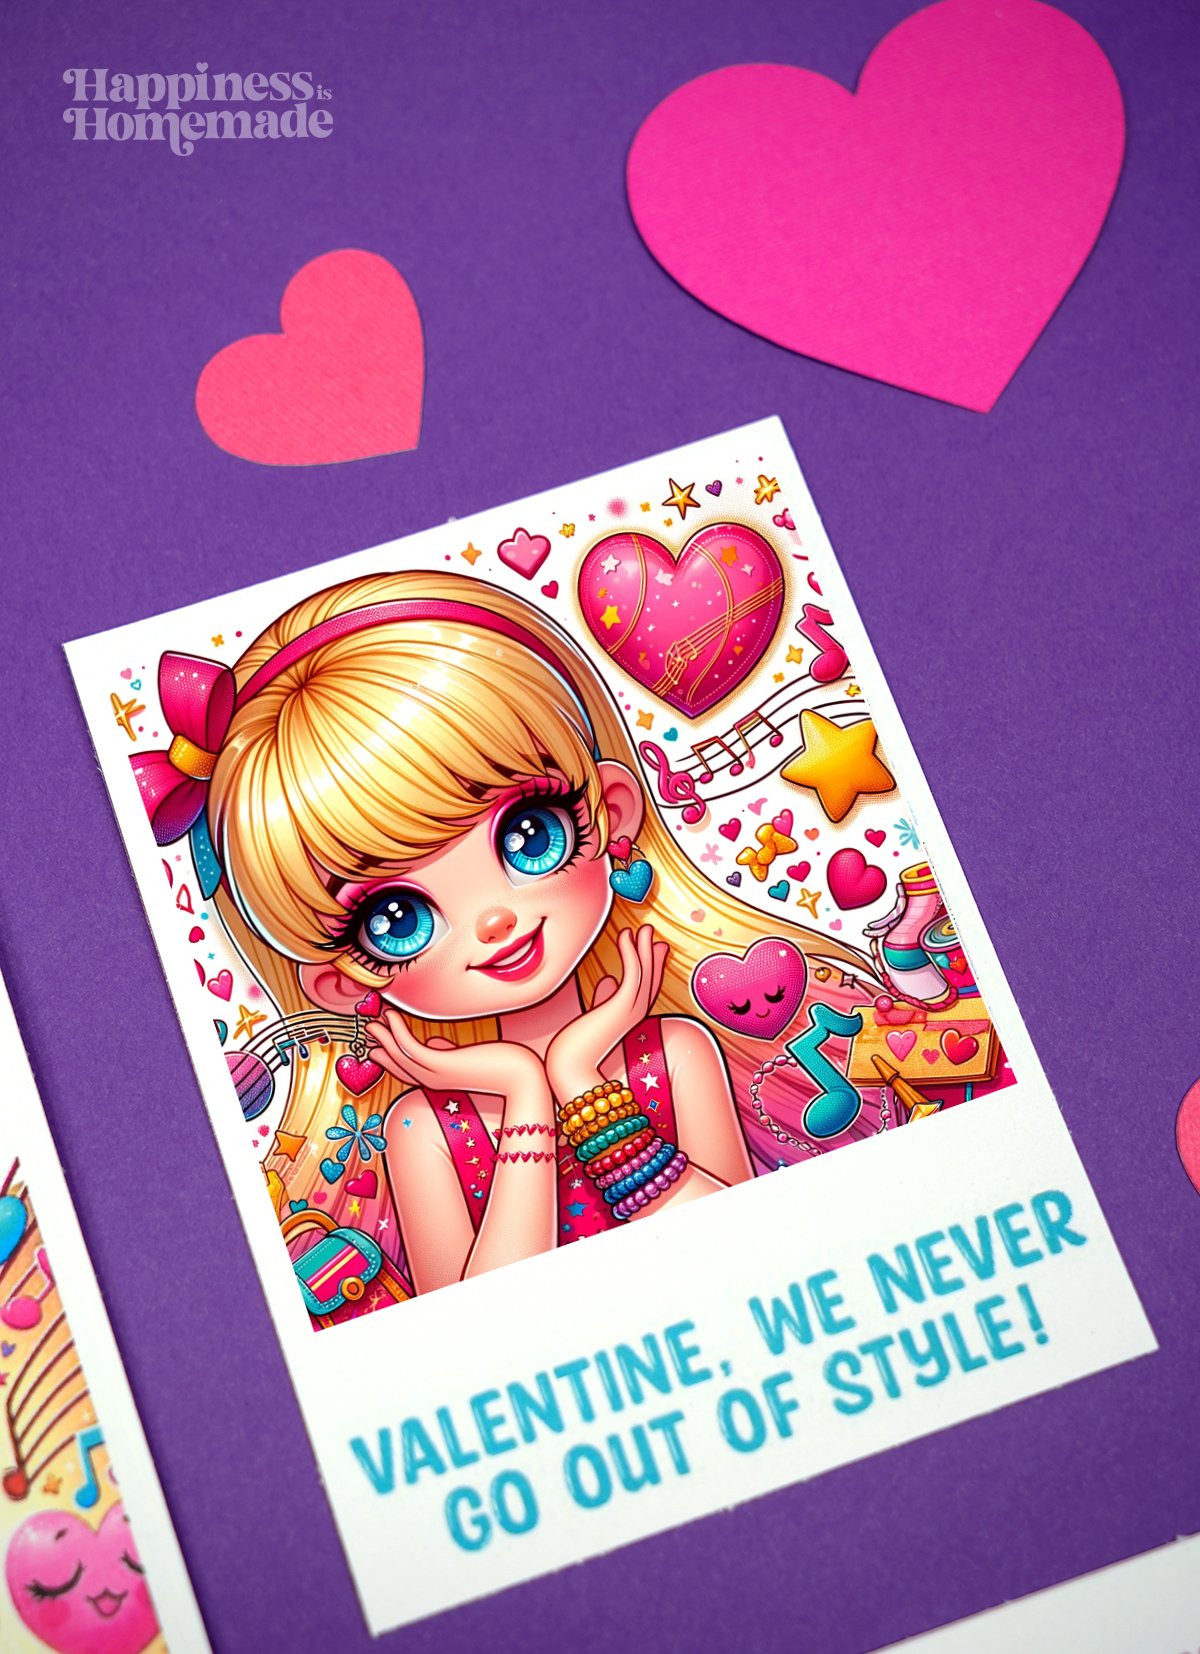 Close up of "Valentine, We Never Go Out of Style" valentine card featuring a blonde pop star with bracelets, hearts, and music notes